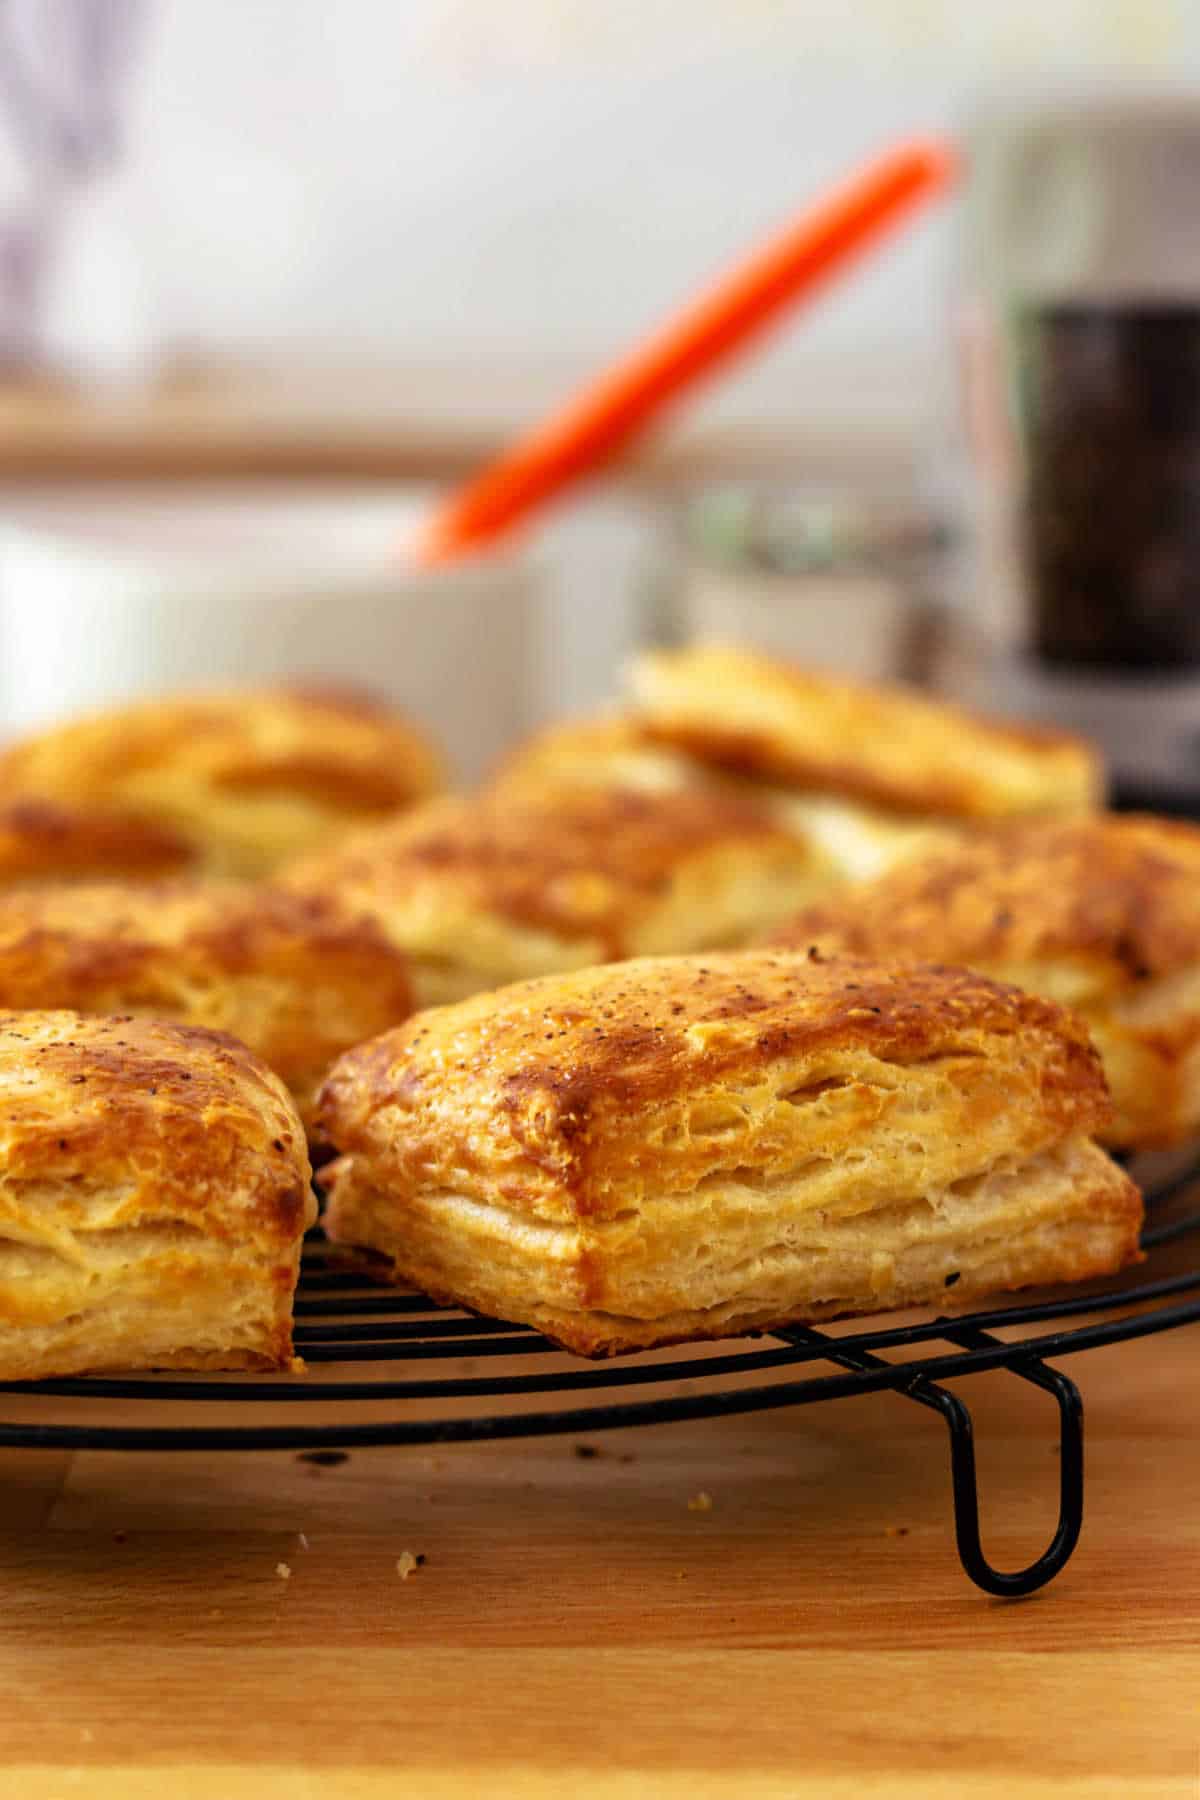 Several golden-brown biscuits coolign on a round, black wire rack on a butcher block surface.